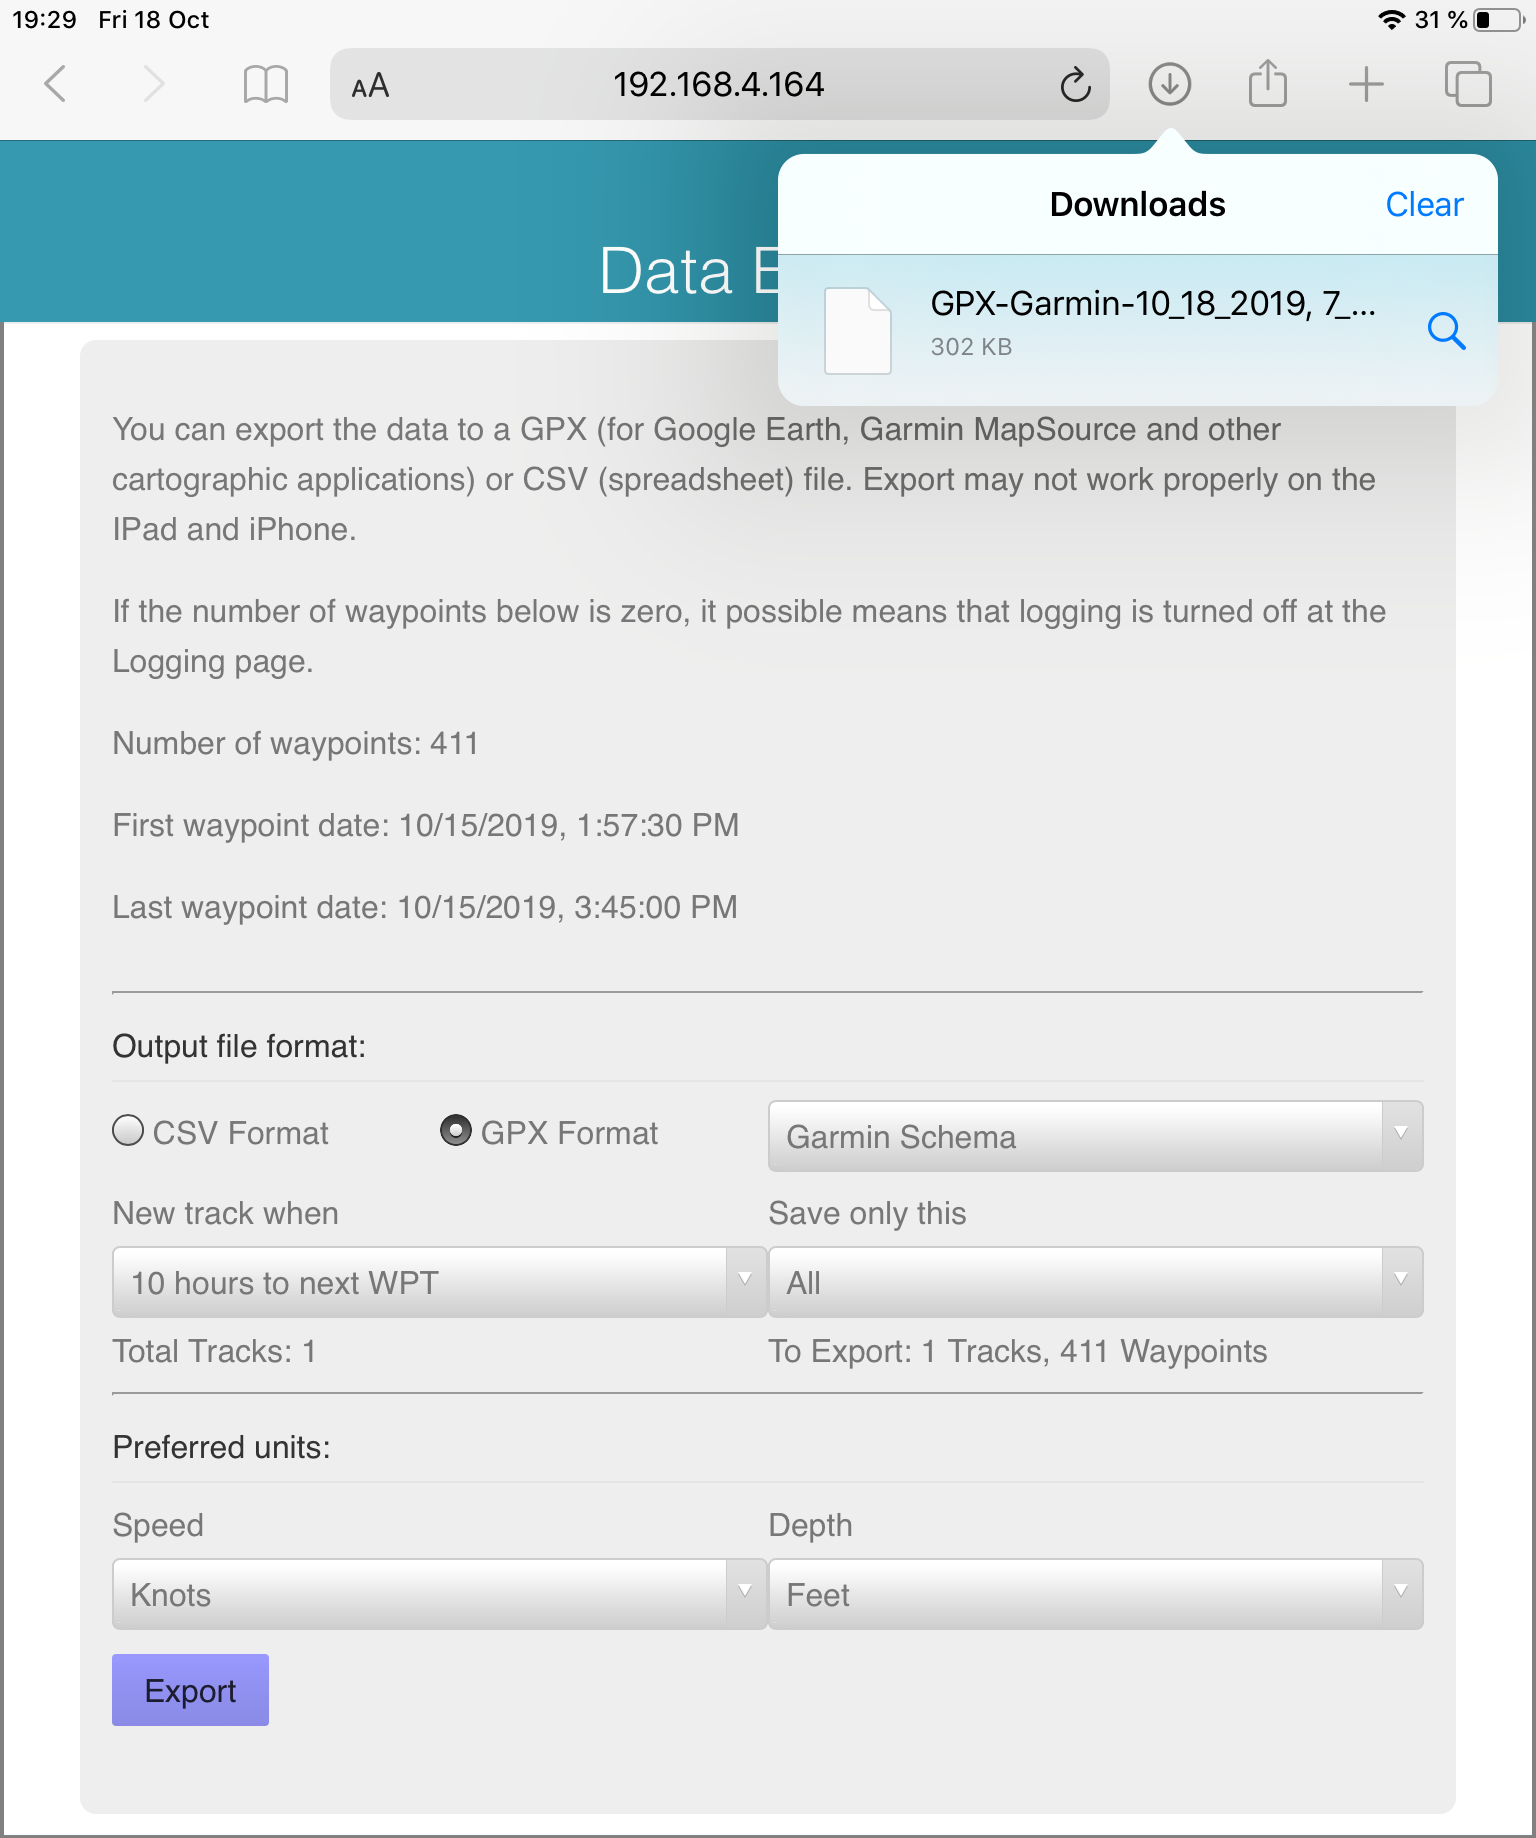 Data export from the Router with IPad (iOS 13)